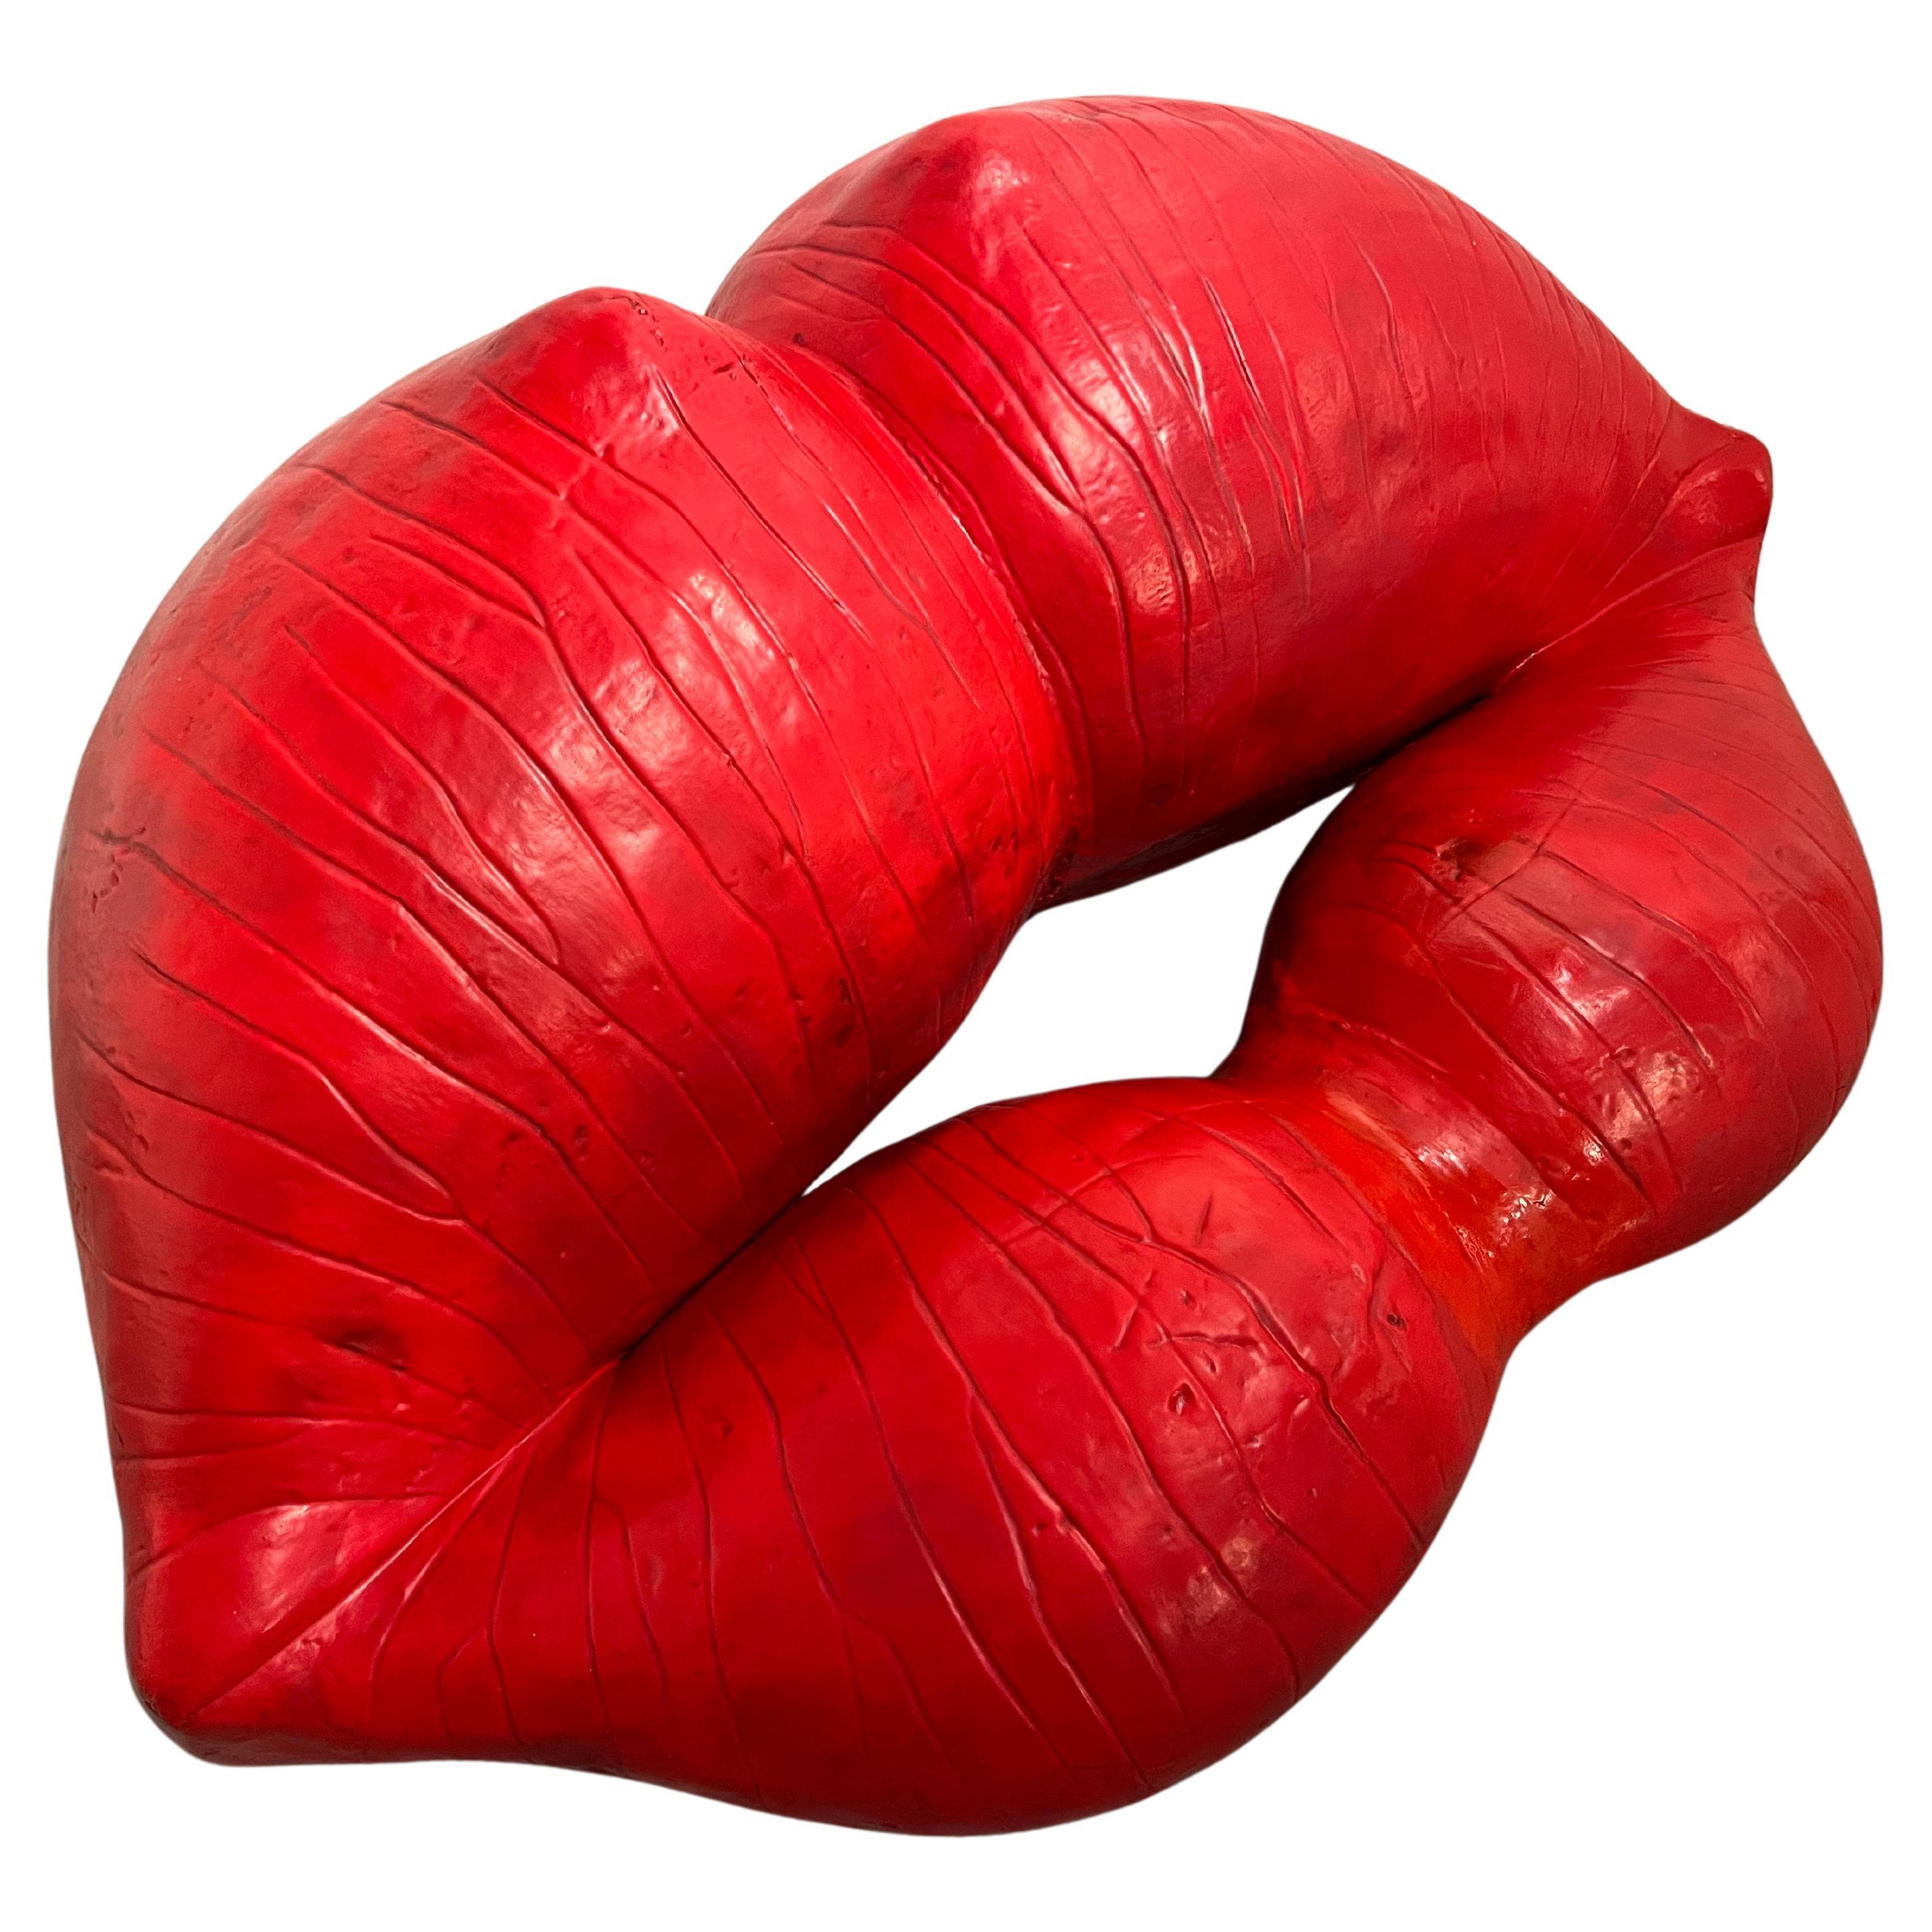 Louis Durot French Post War Artist Red Lips L'echauffeuse Sofa Settee Sculpture For Sale